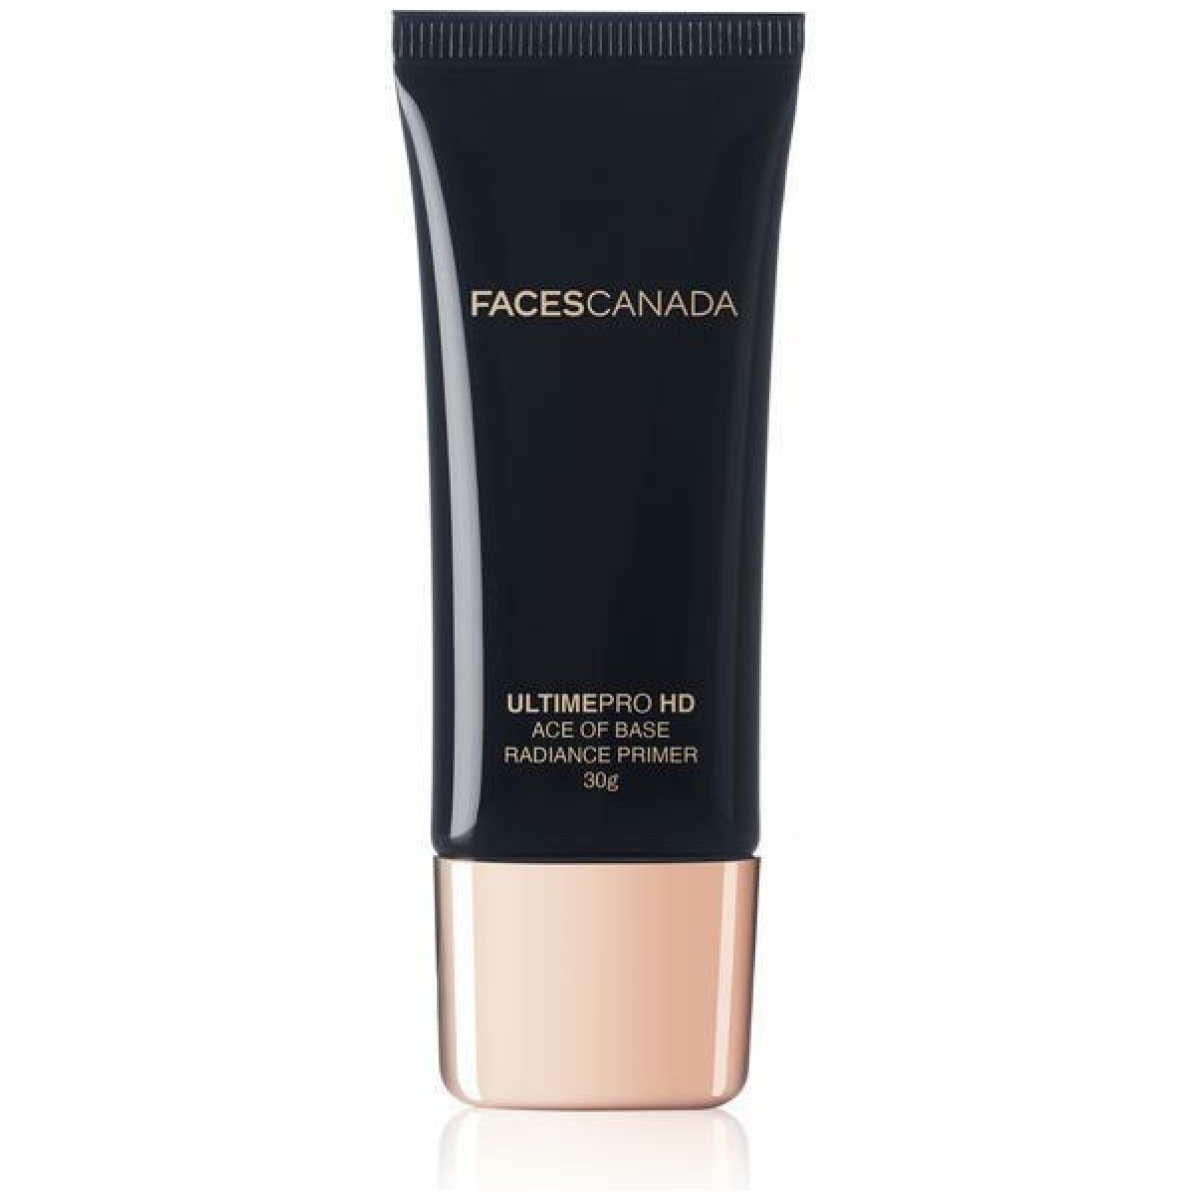 Faces Canada Ultime Pro HD Ace Of Base Radiance Primer(30g)